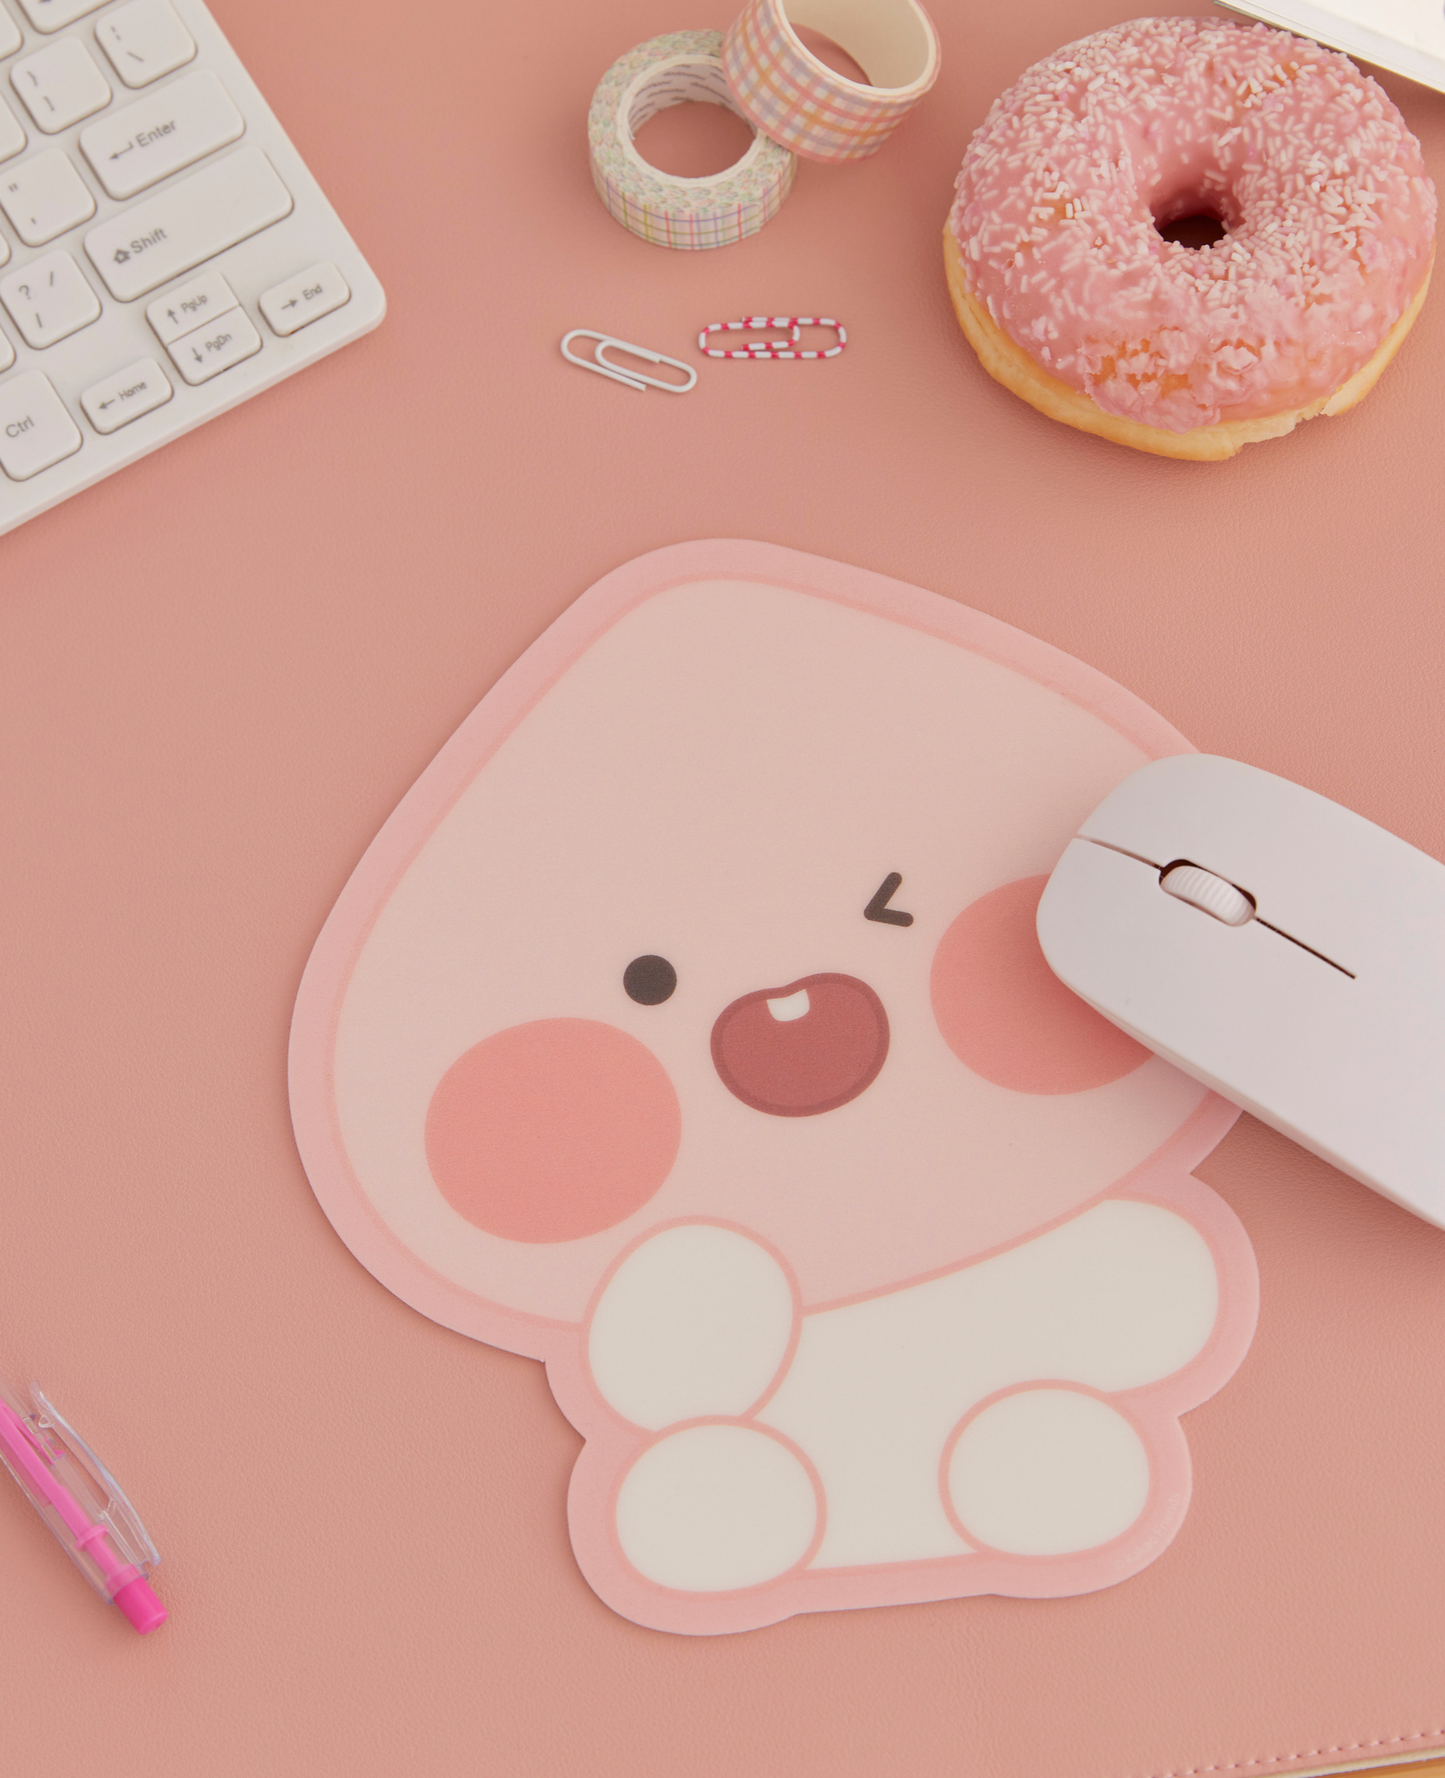 Apeach Baby Dreaming Mouse Pad Kakao Friends